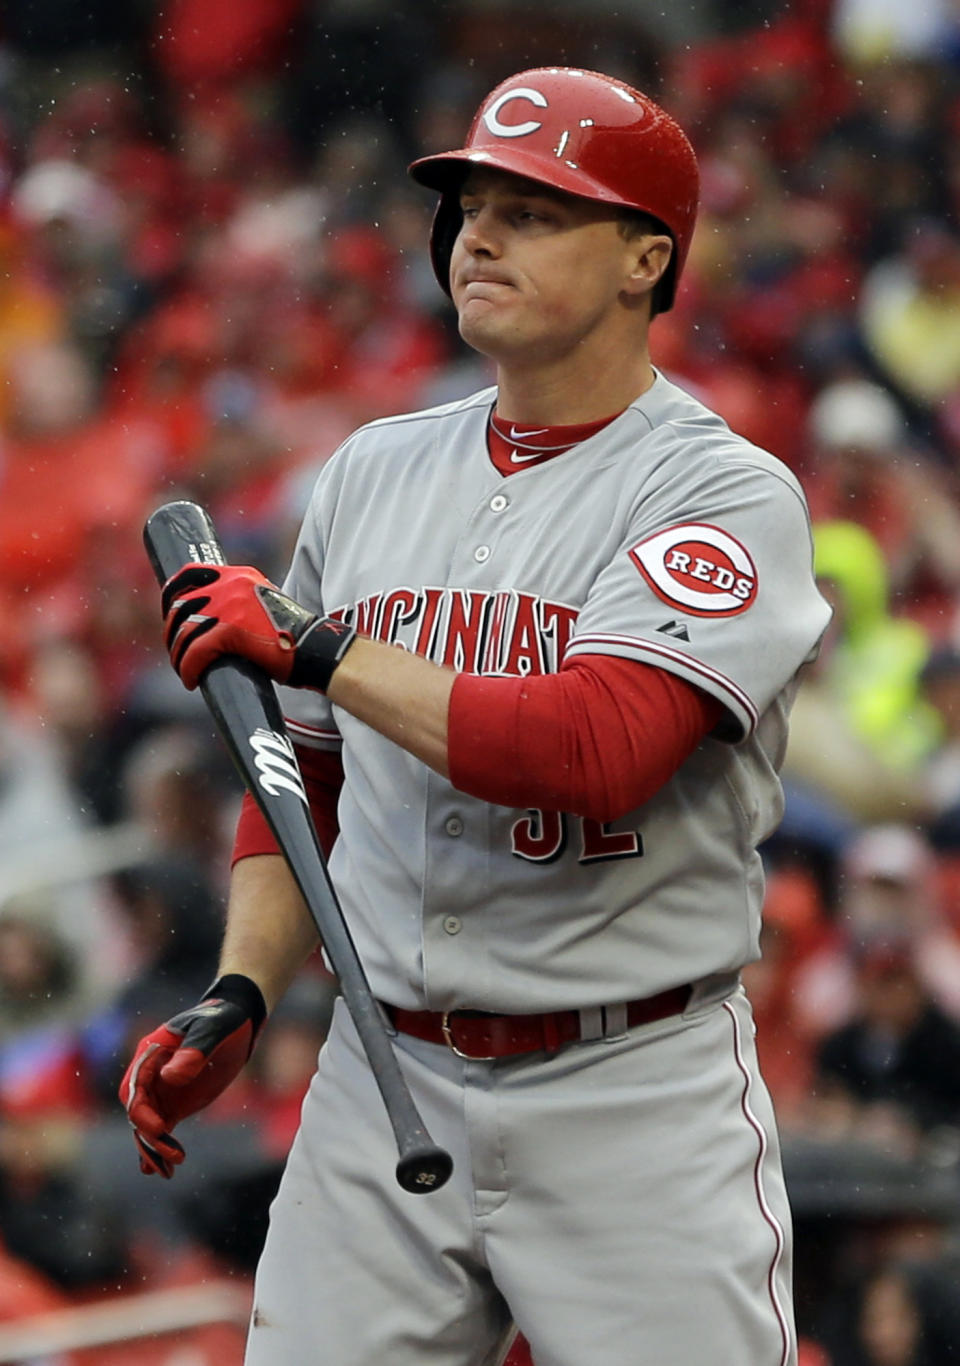 Cincinnati Reds' Jay Bruce holds his bat after striking out to end the top of the first inning of a baseball game against the St. Louis Cardinals, Monday, April 7, 2014, in St. Louis. (AP Photo/Jeff Roberson)